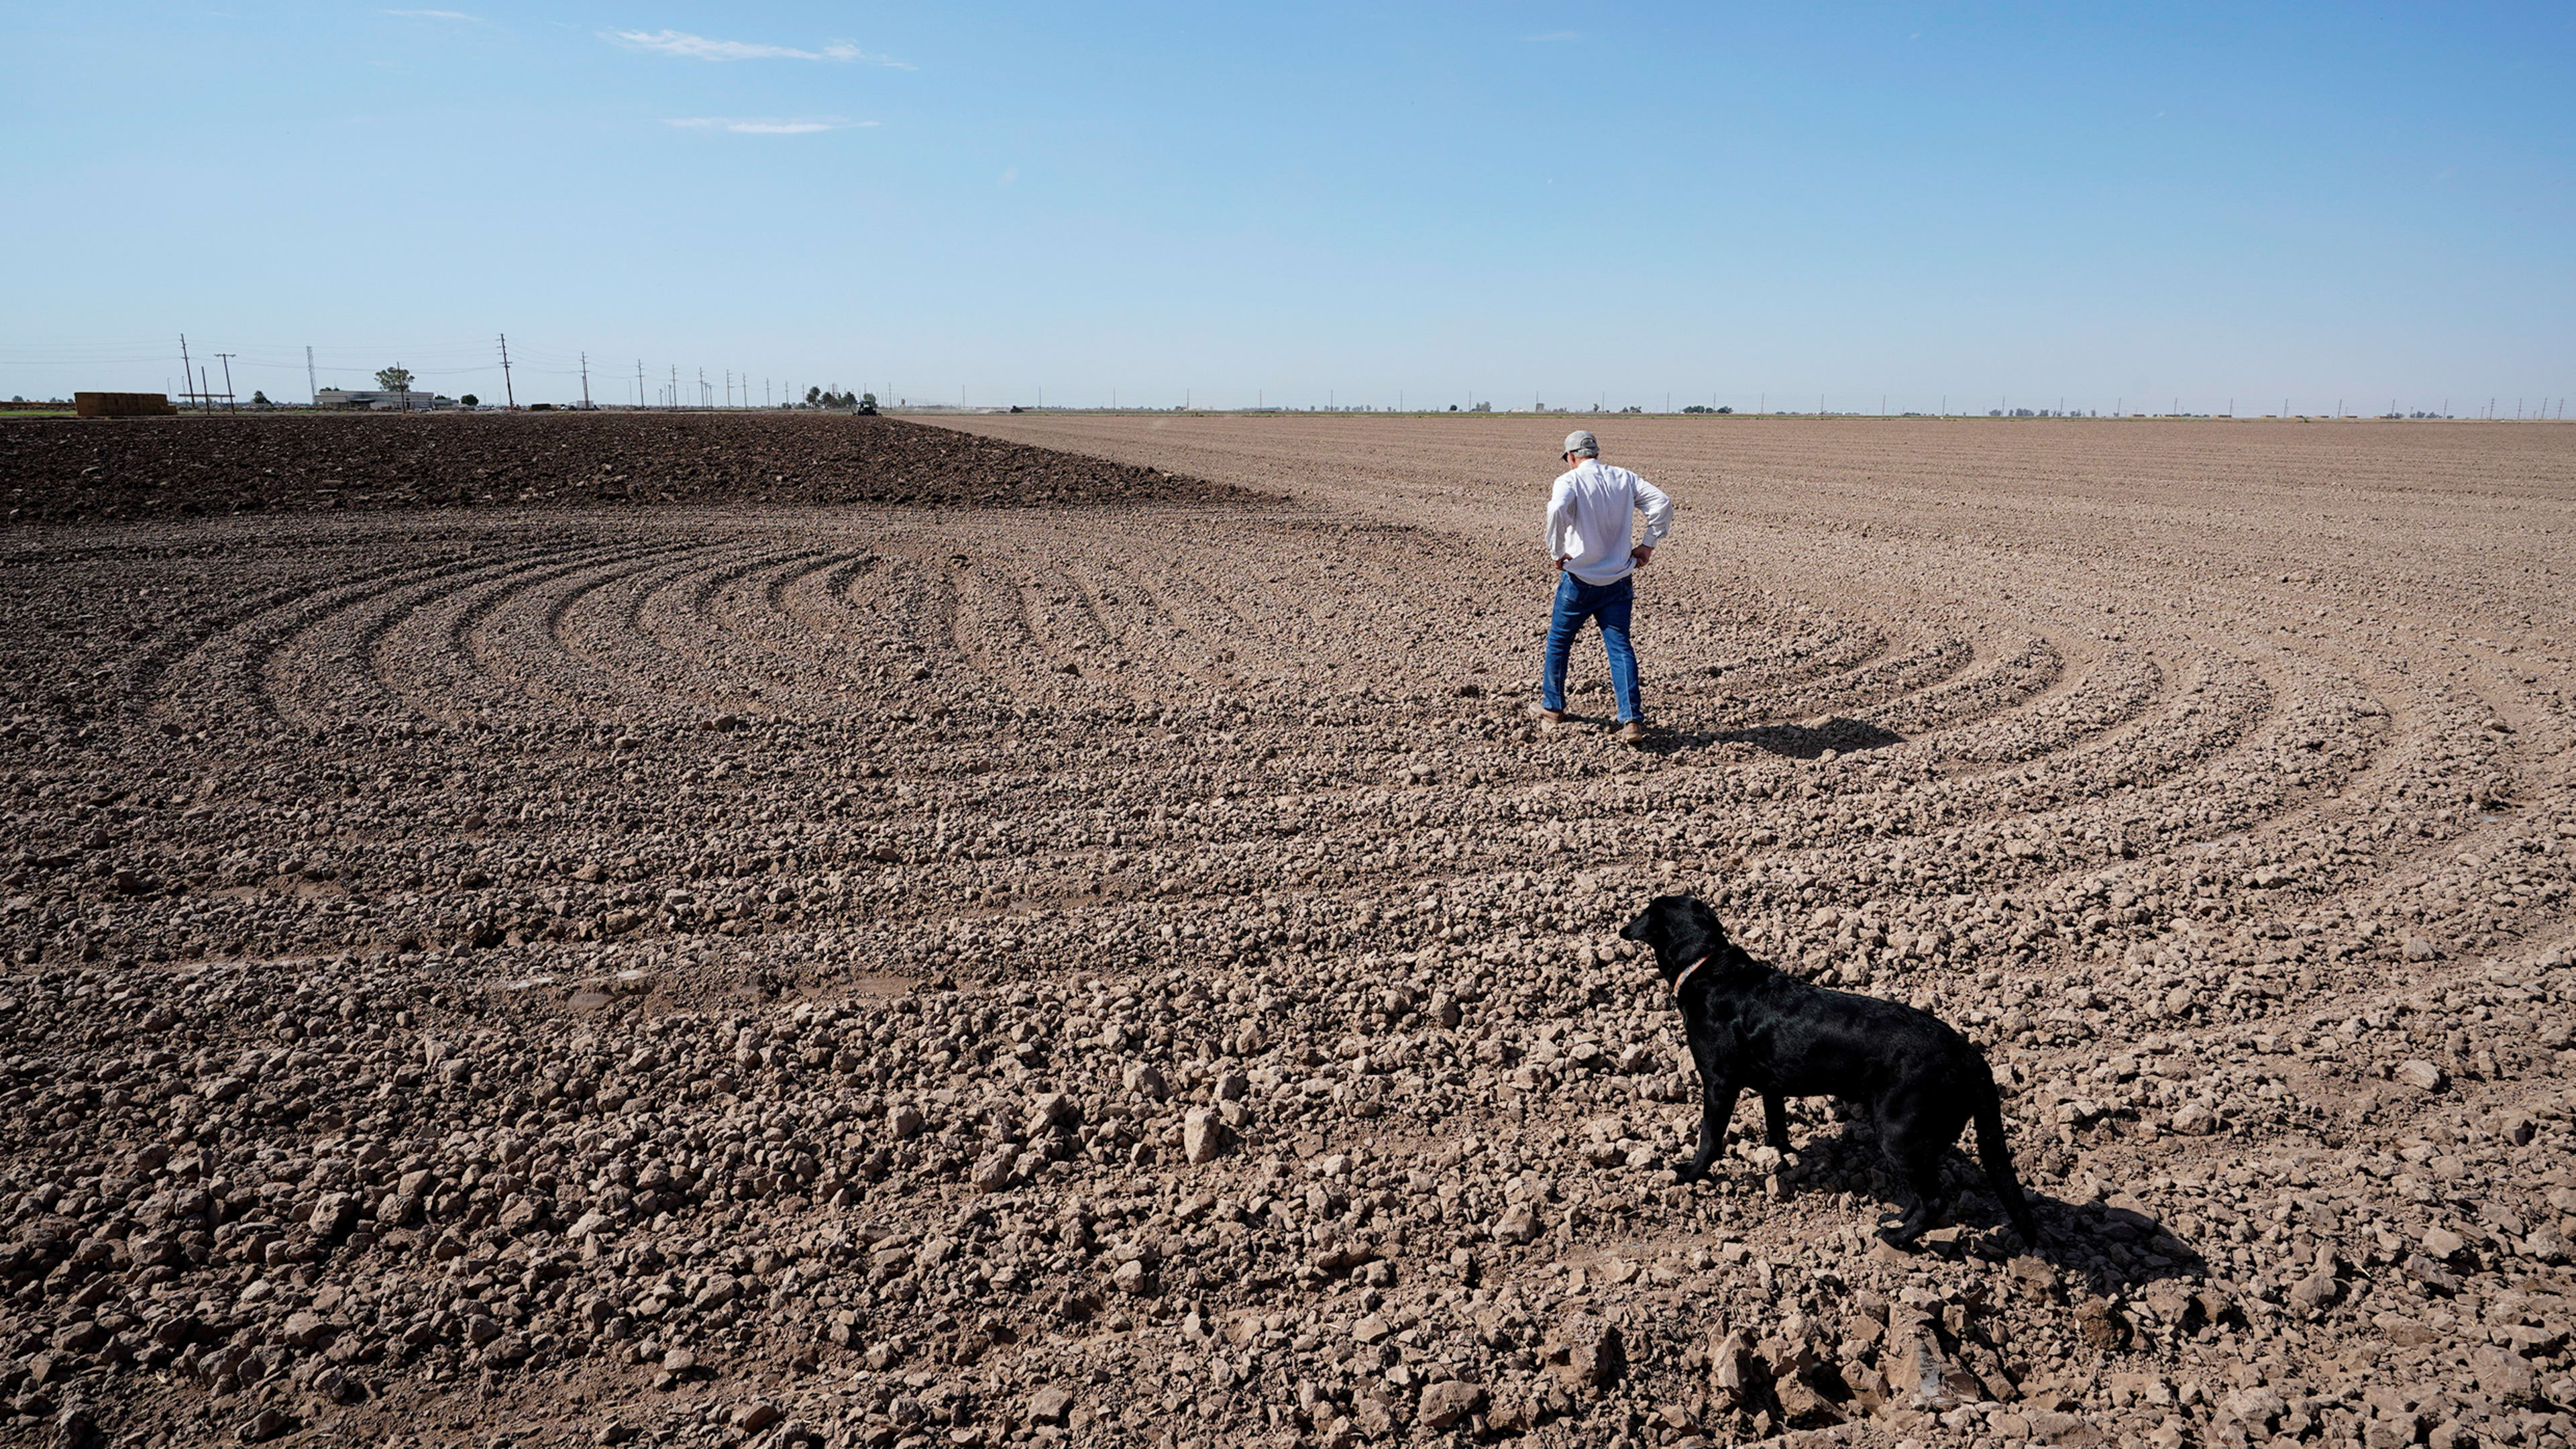 The government wants to pay Western farmers to save water by not farming